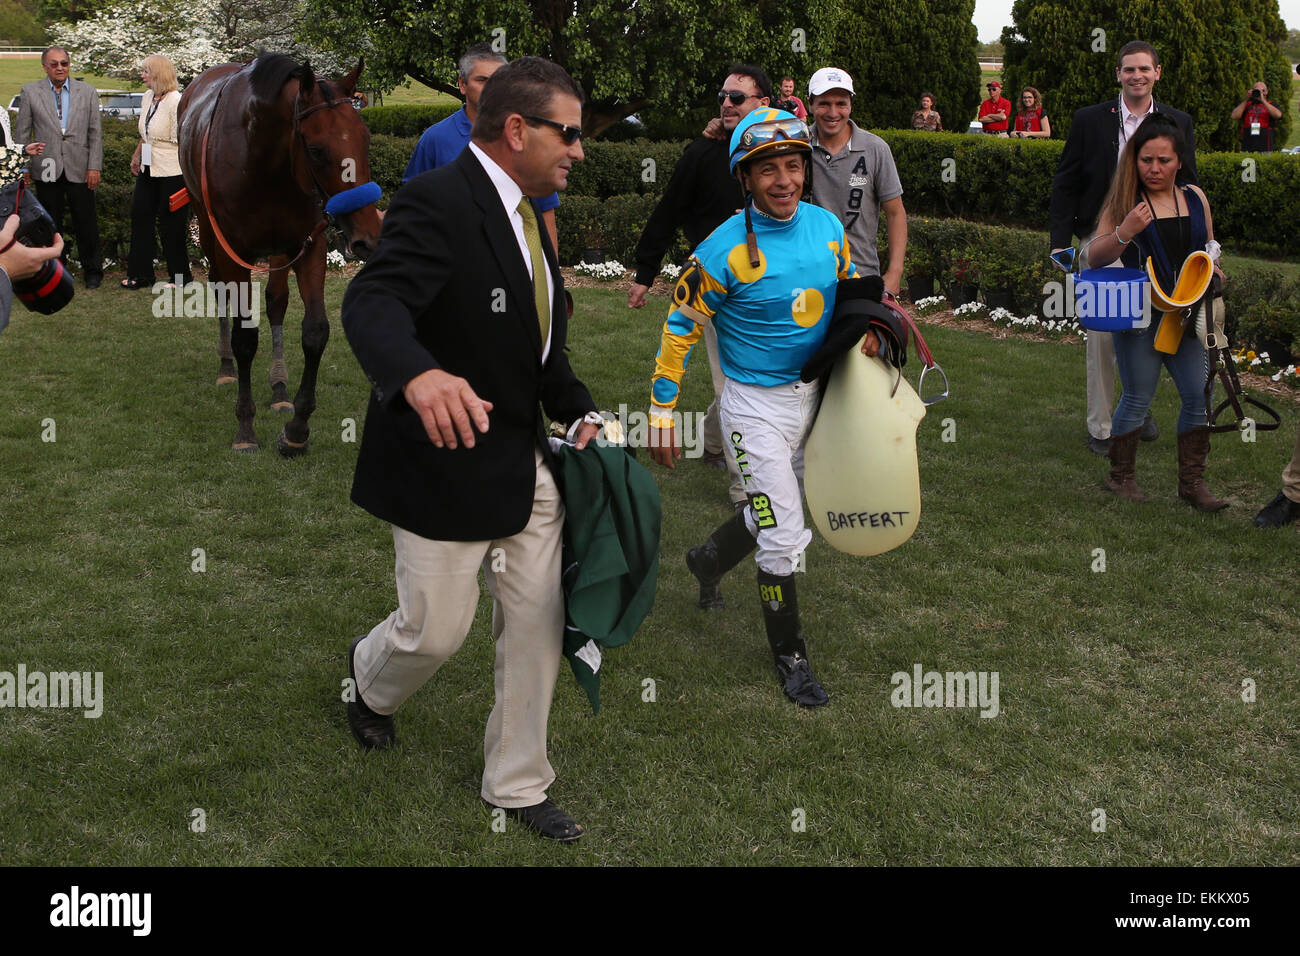 Hot Springs, Arkansas, USA. 11th Apr, 2015. American Pharoah, co-trainer Jimmy Barnes and jockey Victor Espinoza leaving the winners circle after the Arkansas Derby at Oaklawn Park in Hot Springs, AR. Justin Manning/ESW/CSM/Alamy Live News Stock Photo